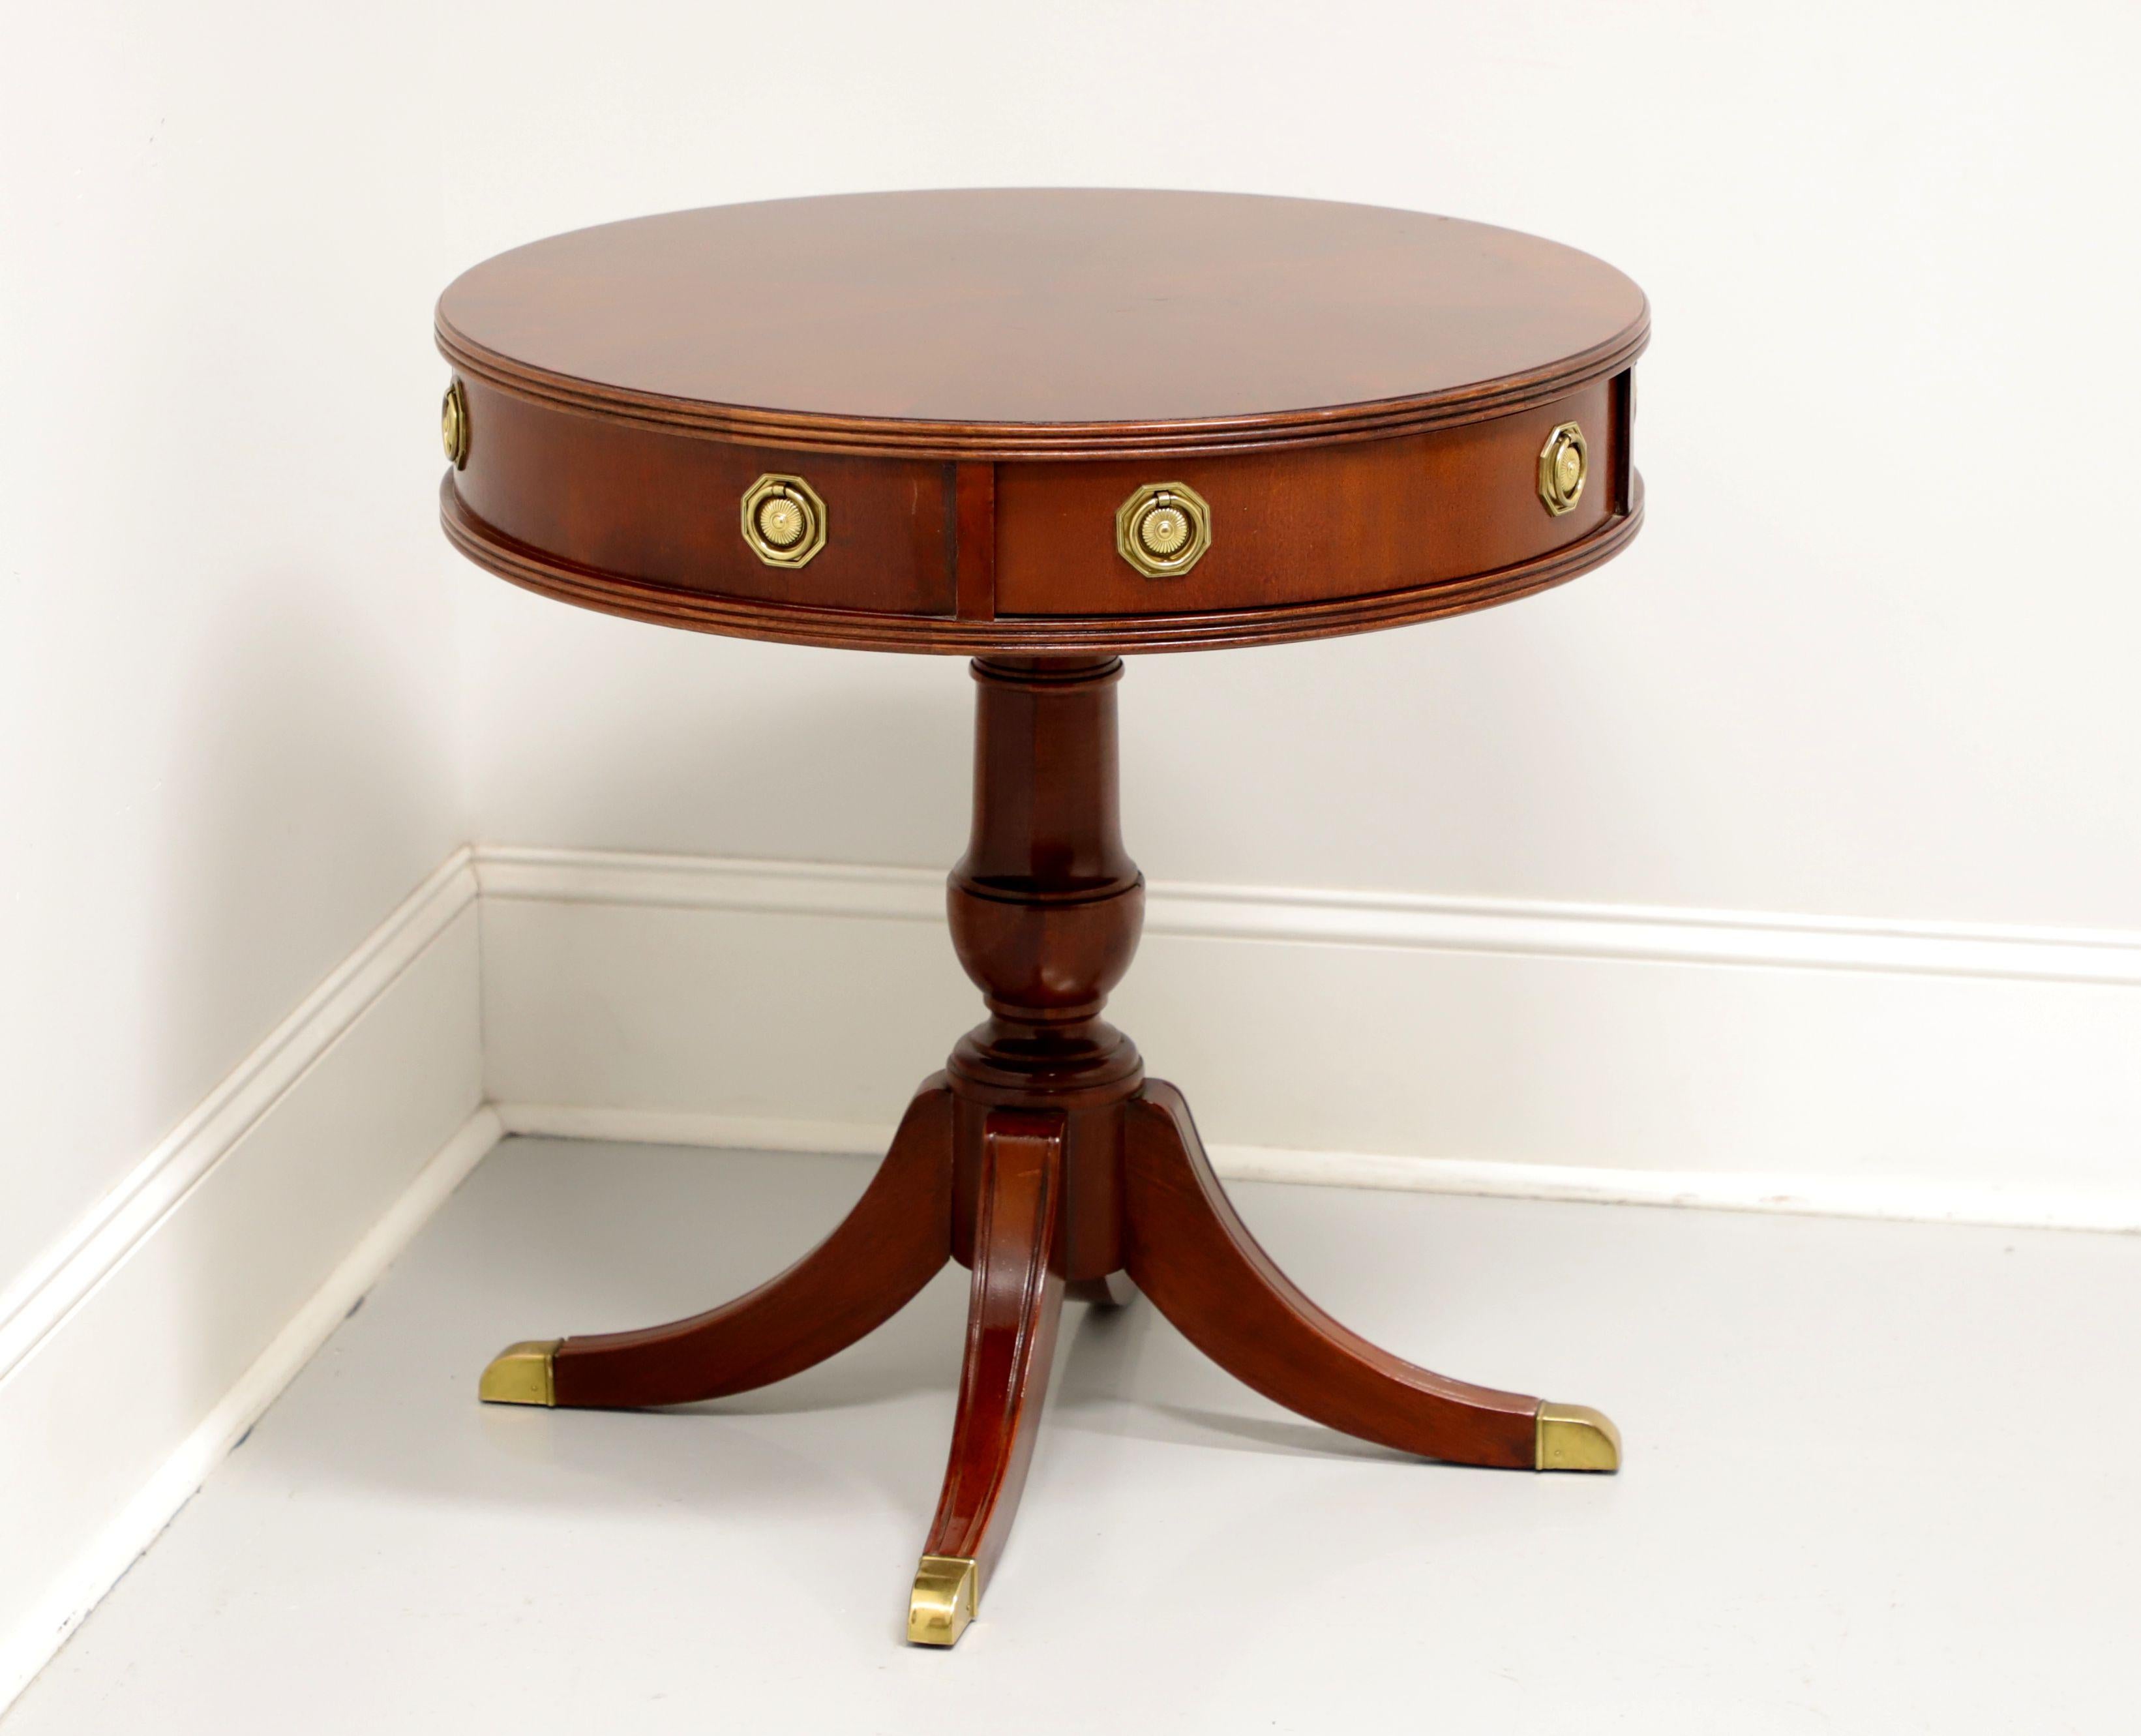 HAMMARY Banded Inlaid Mahogany Round Drum Table with Pedestal Base 3